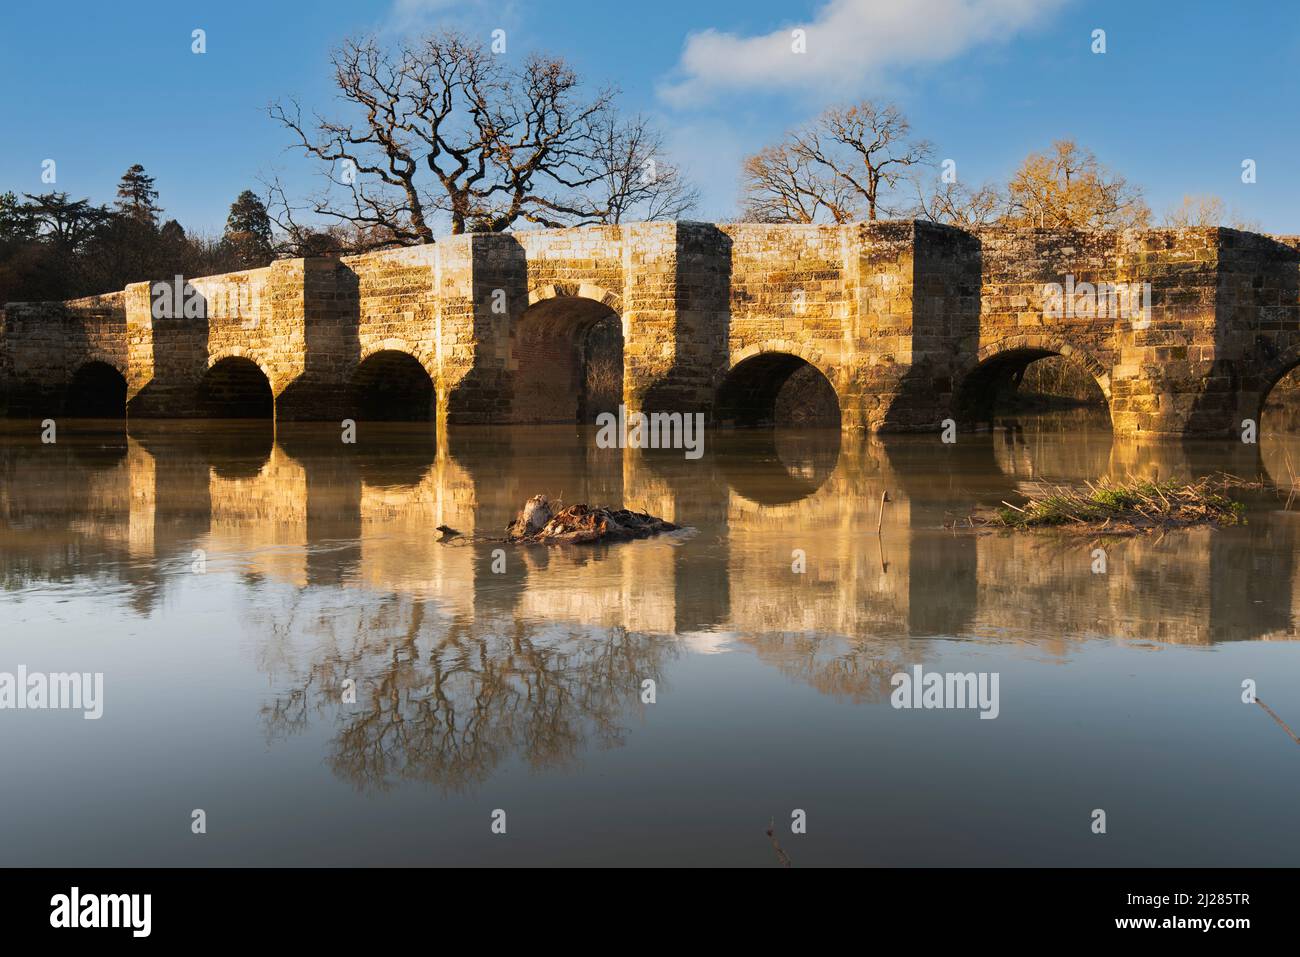 A late winter afternoon at Stopham Bridge over the River Arun, a listed monument built in 1422-23 near Pulborough, West Sussex, United Kingdom Stock Photo